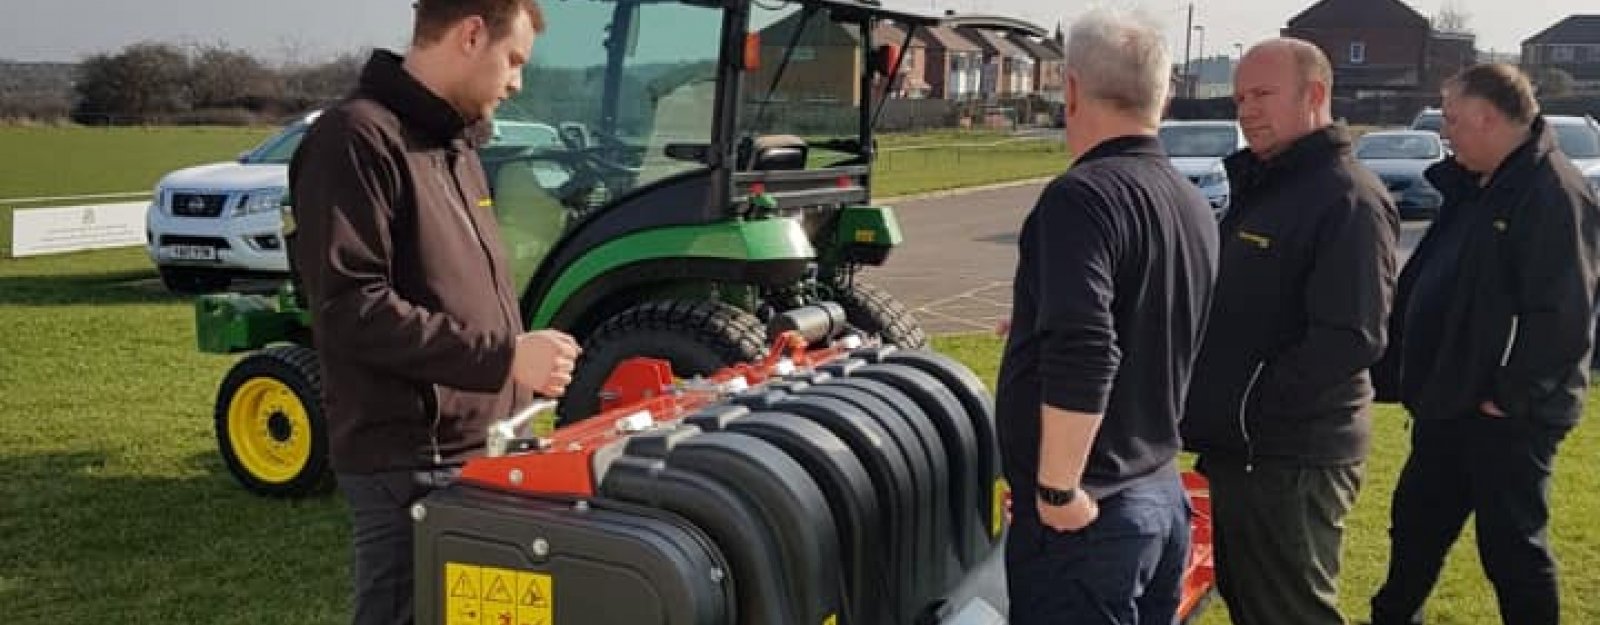 Balmers GM provide demo kit for the IOG L1 Winter Pitch Course